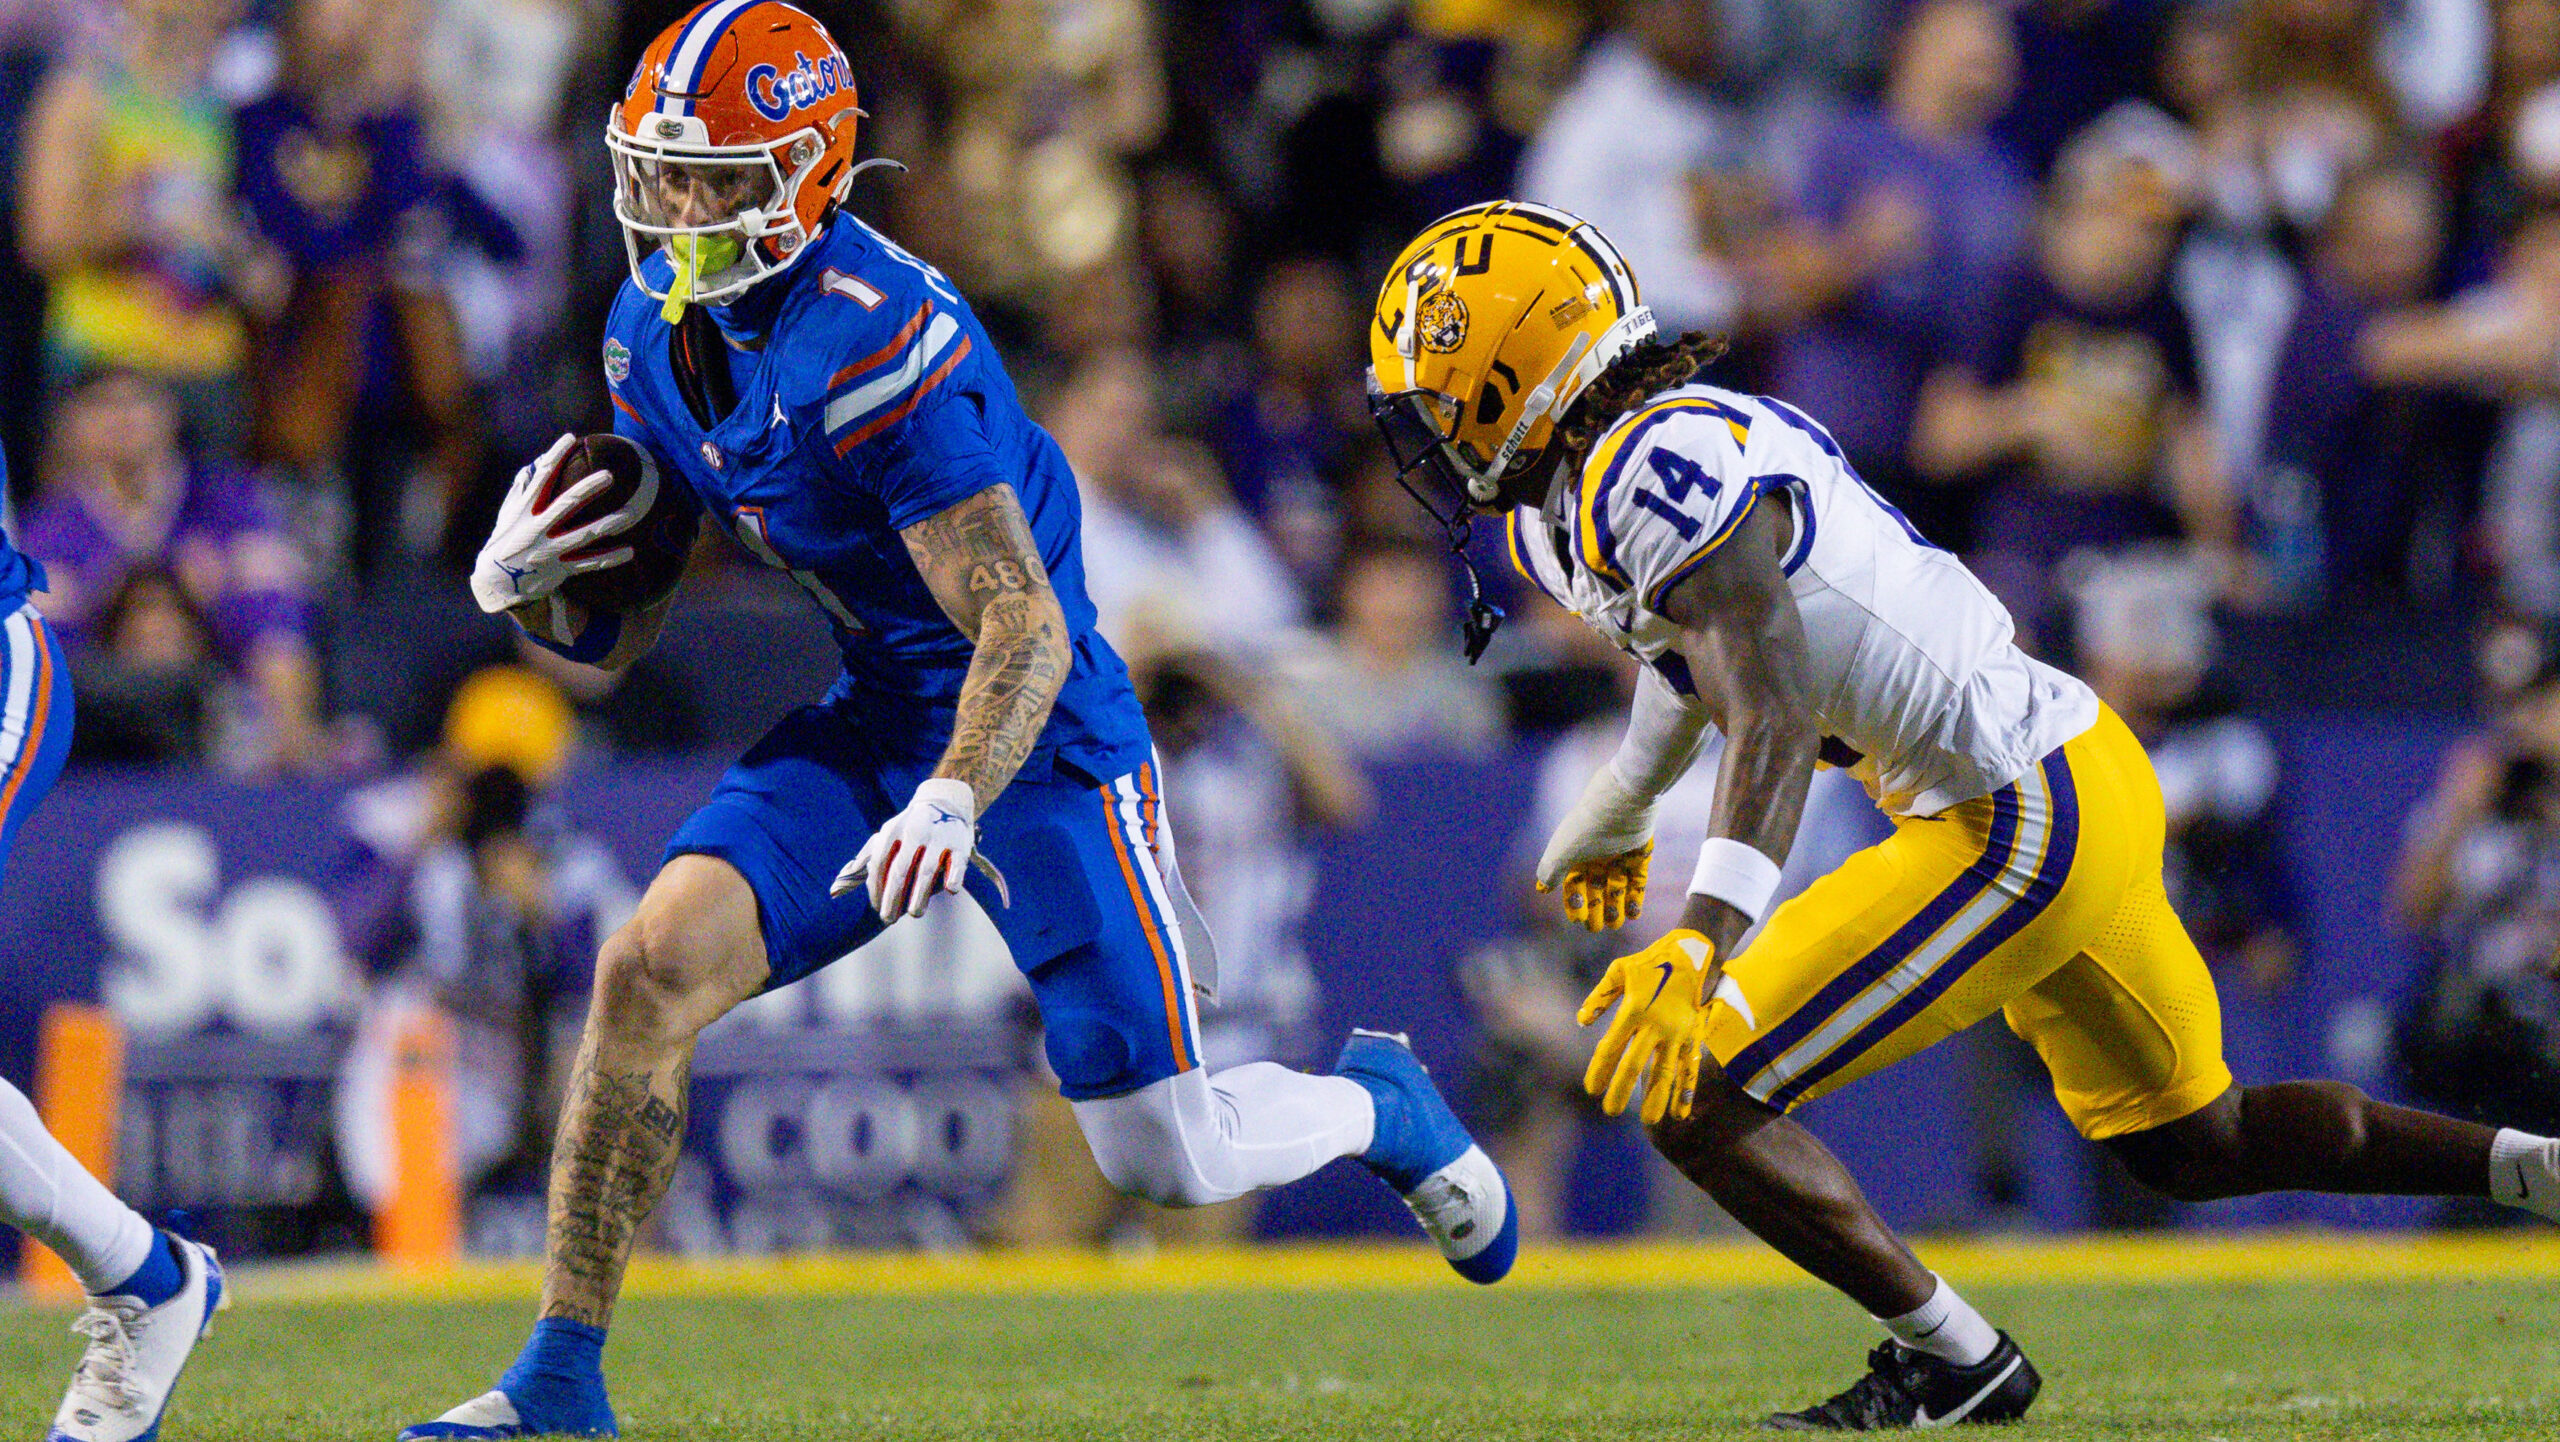 Florida wide recevier Ricky Pearsall runs away from LSU defender.